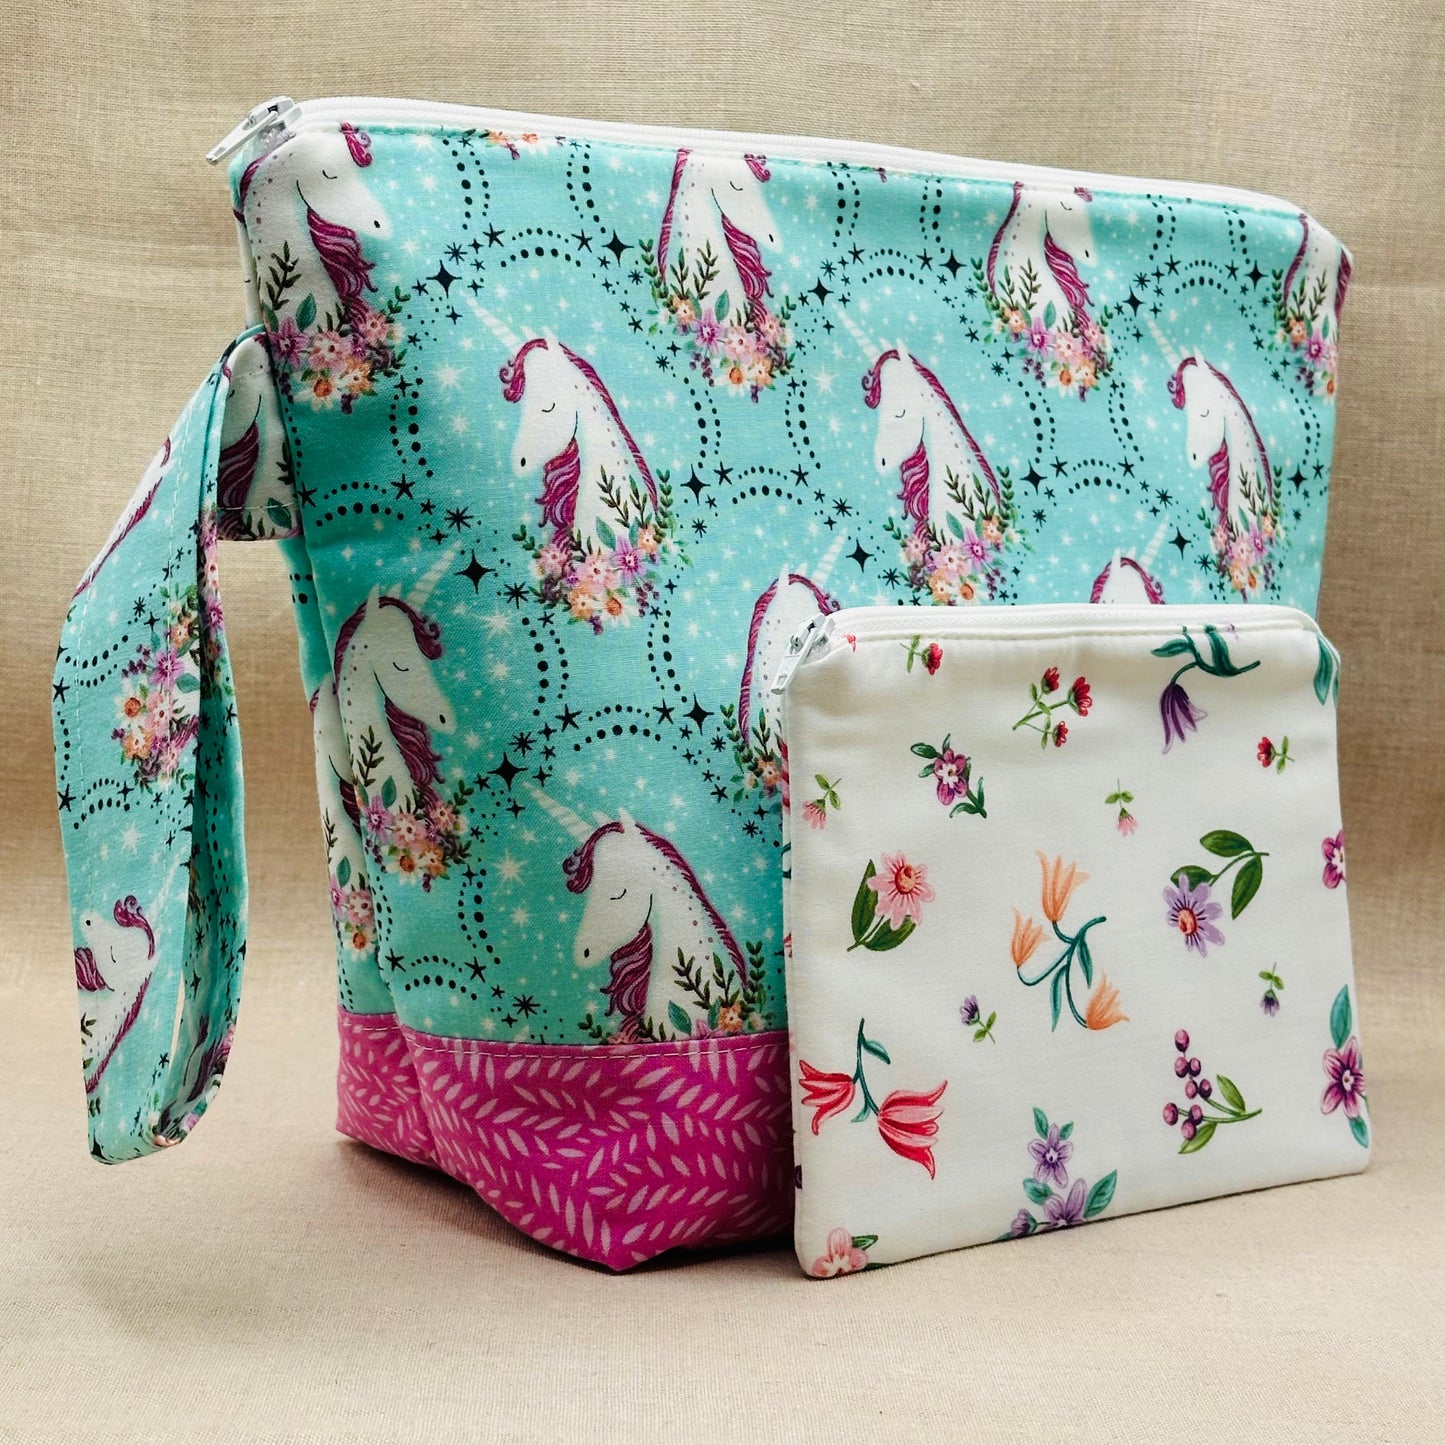 Unicorn Portraits - Project Bag with Coordinating Notions Pouch